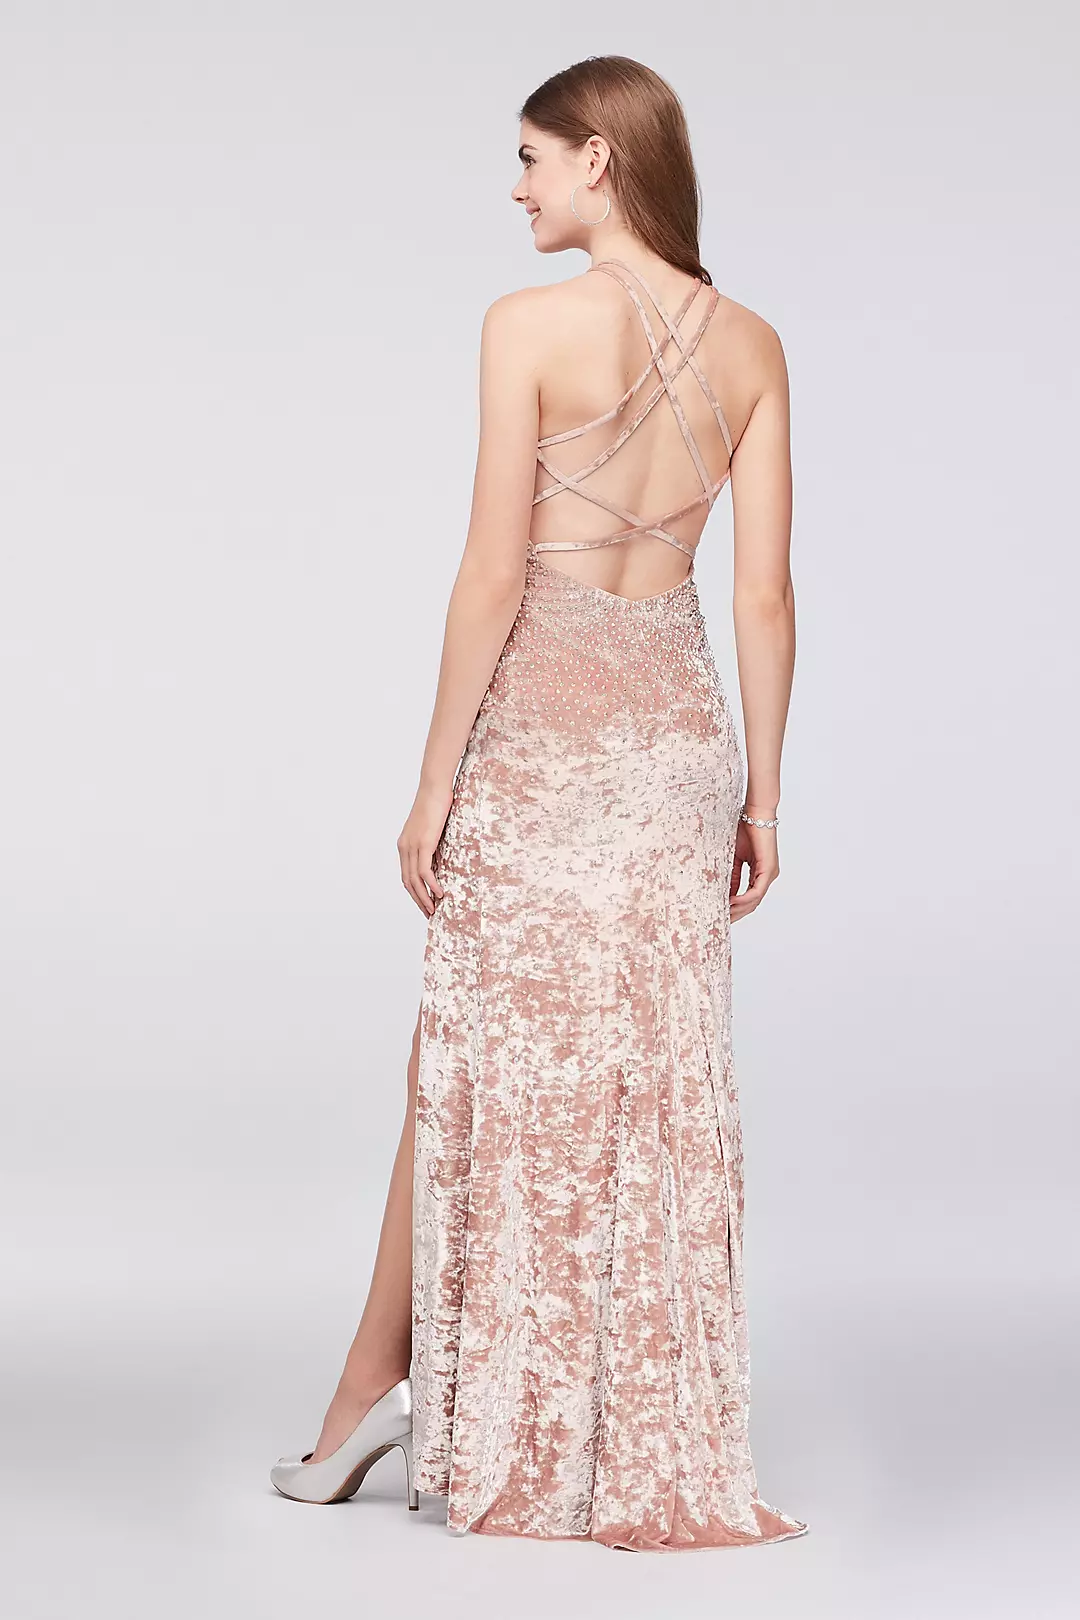 Crushed Velvet Halter Sheath Gown with Beading Image 2